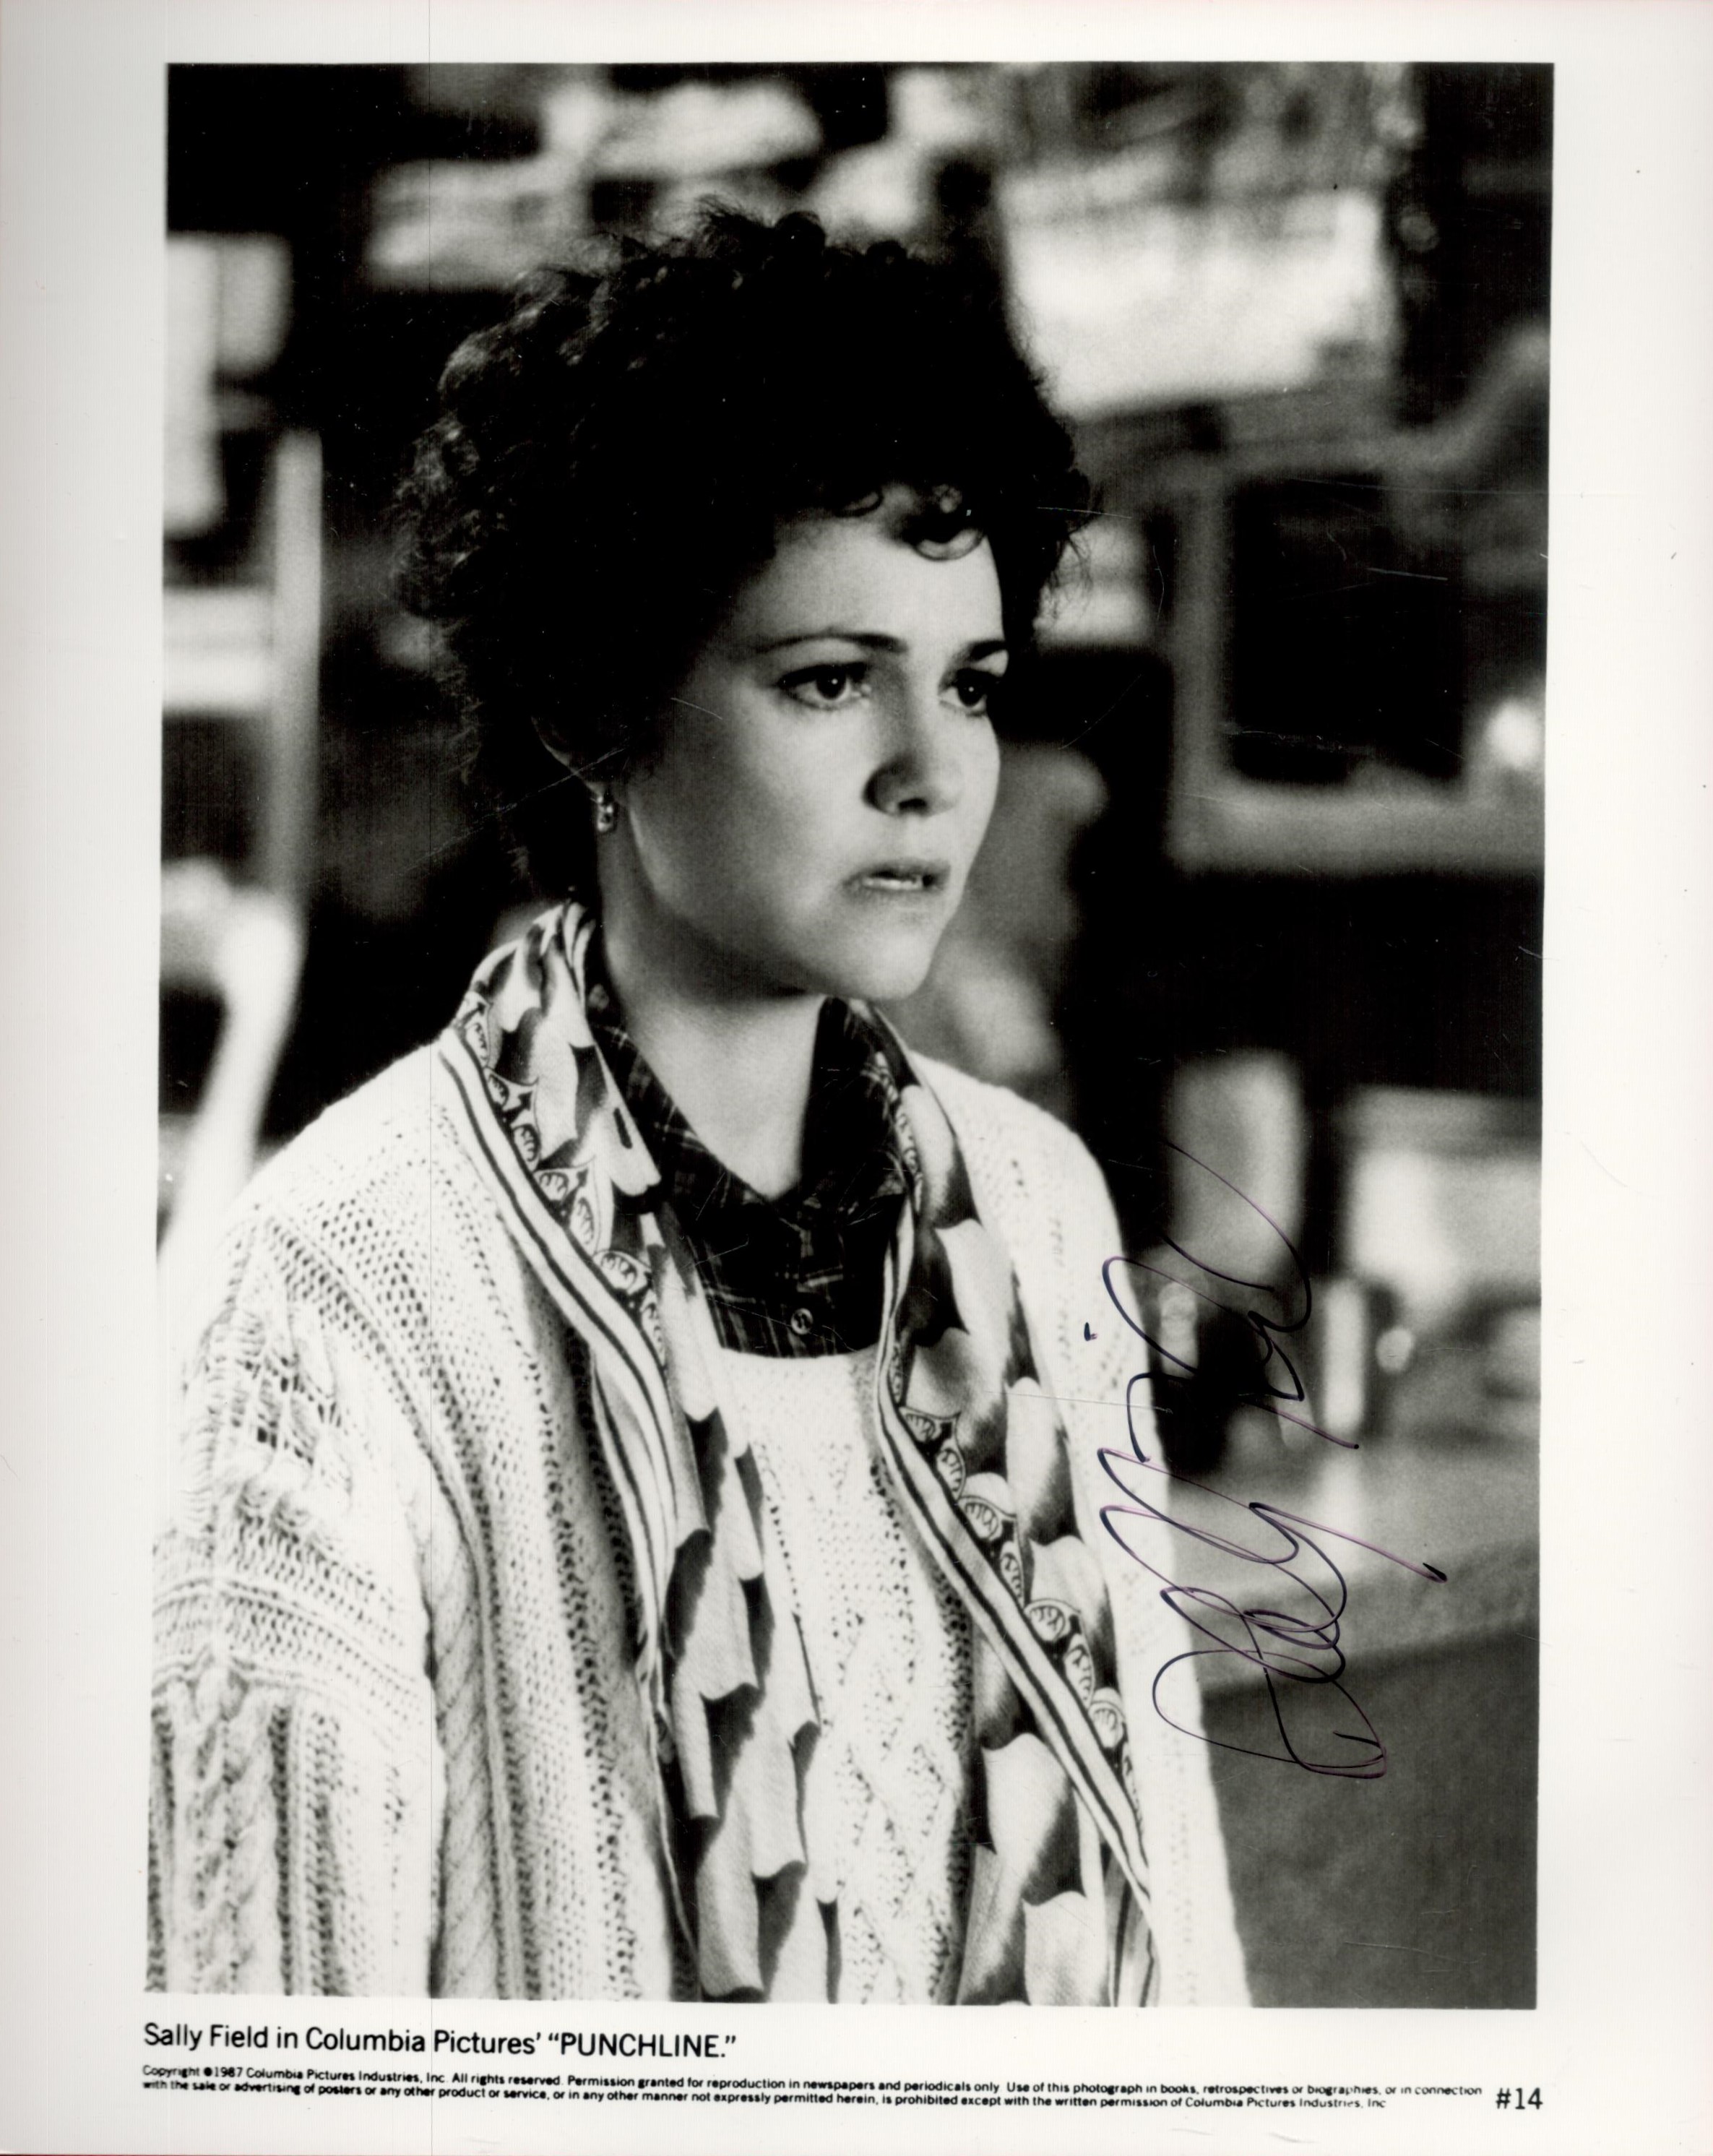 Sally Field signed 10x8 black and white promo photo. All autographs come with a Certificate of